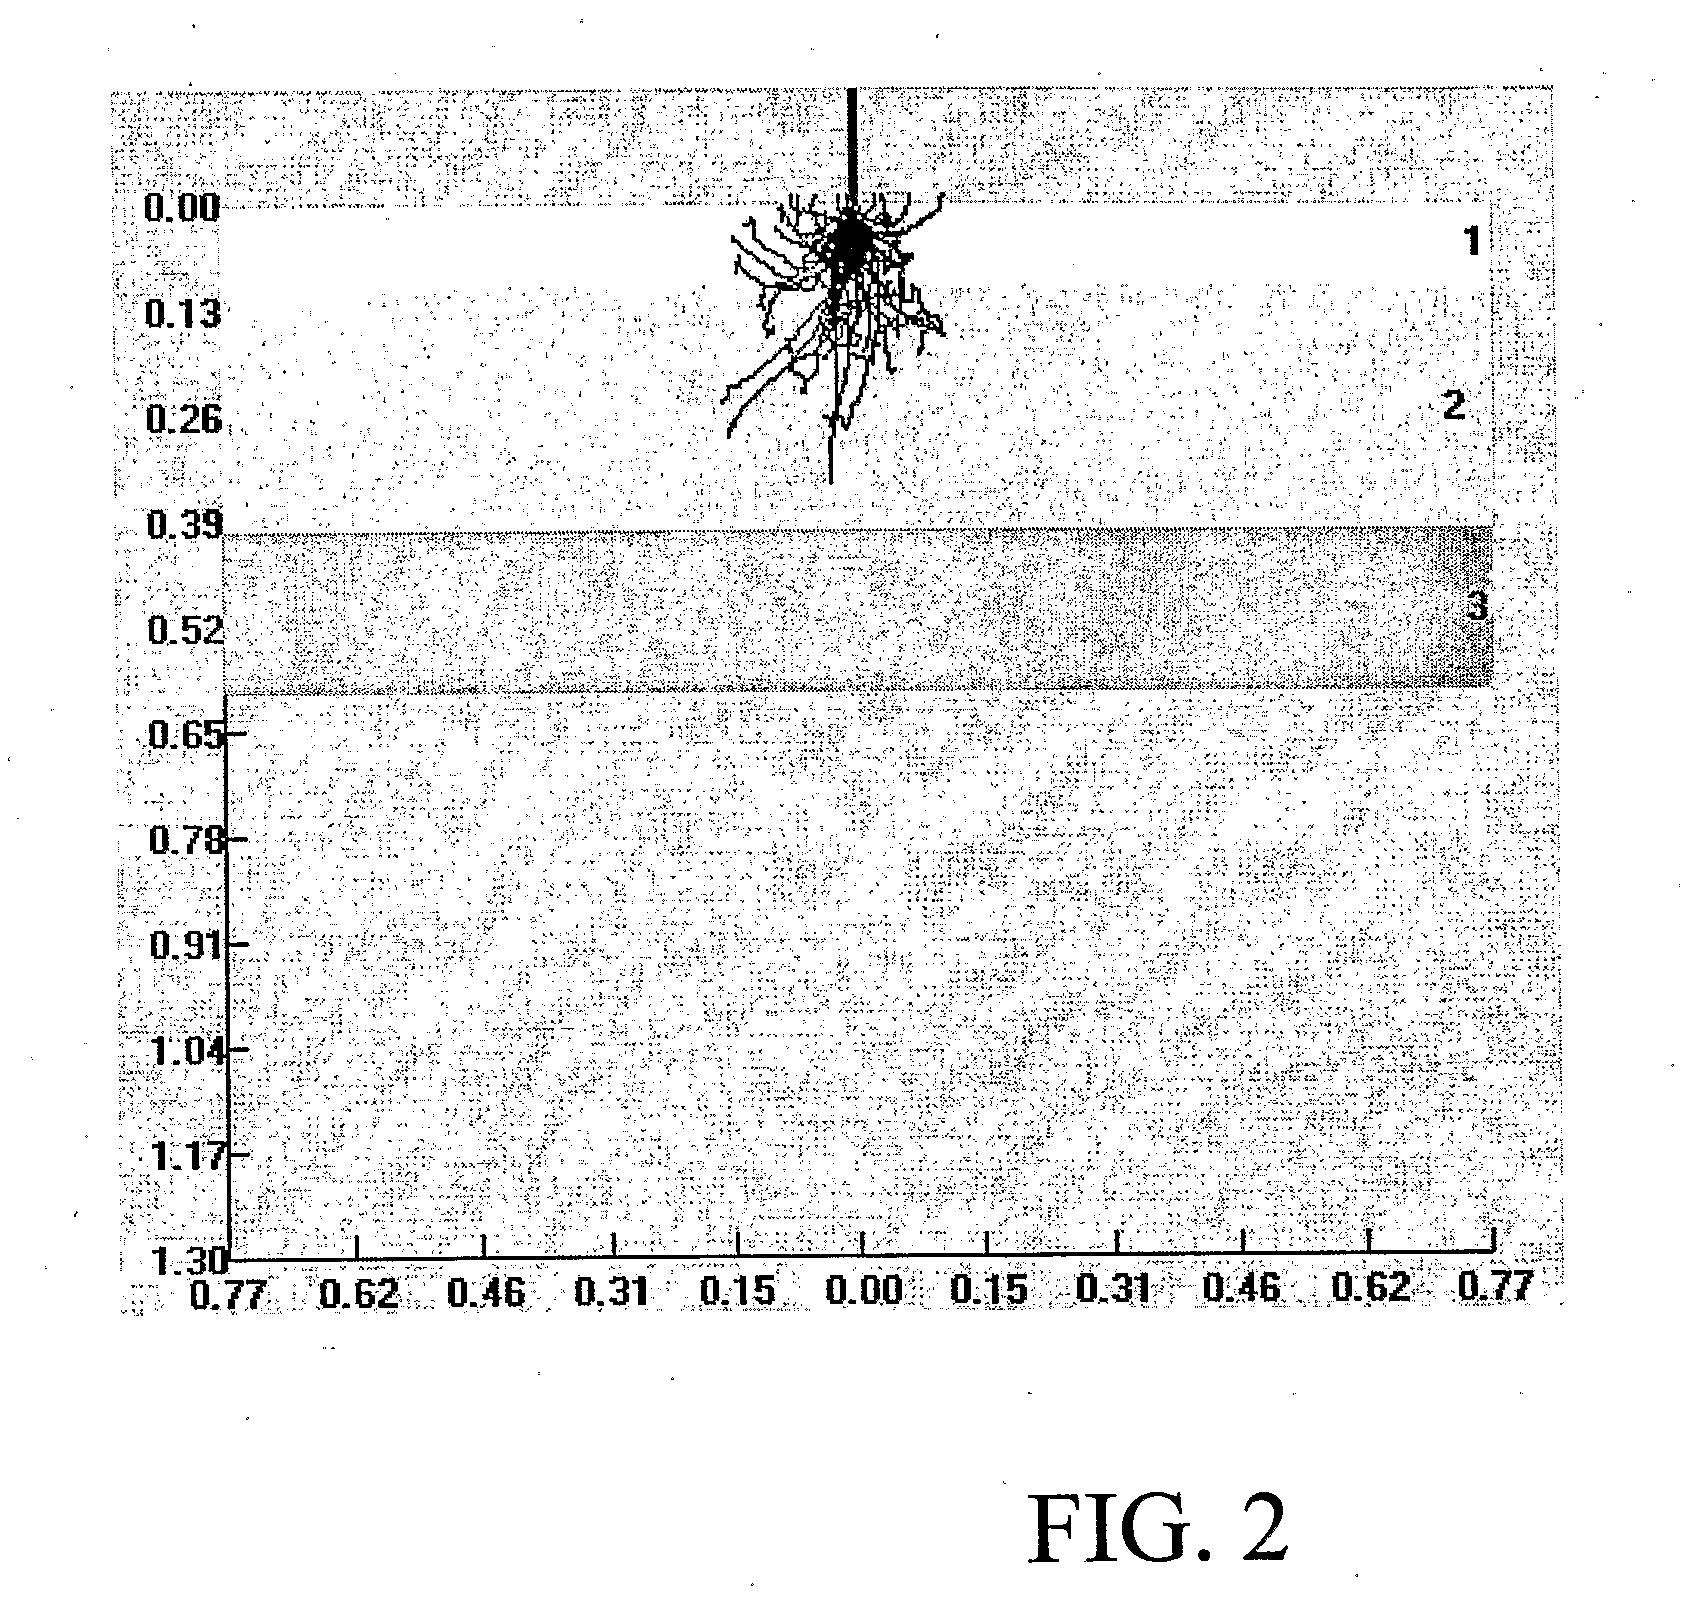 Method of determining the feasibility of a proposed structure analysis process